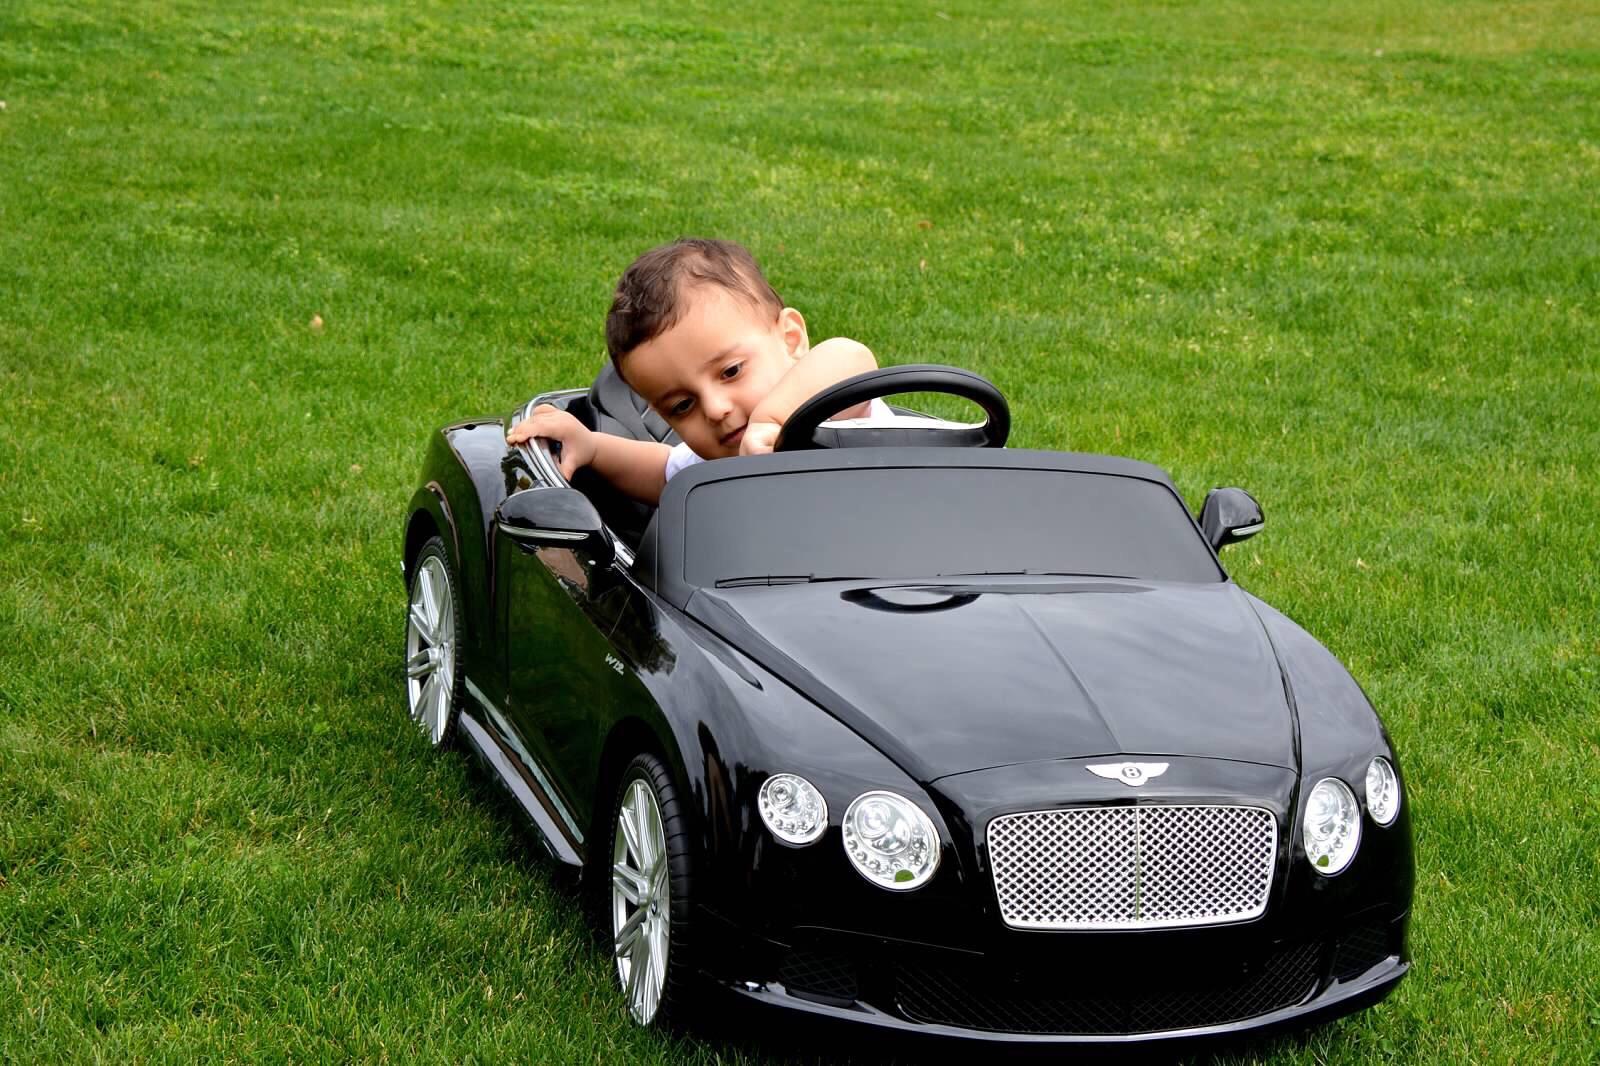 Beep beep is that my baby in a Bentley?